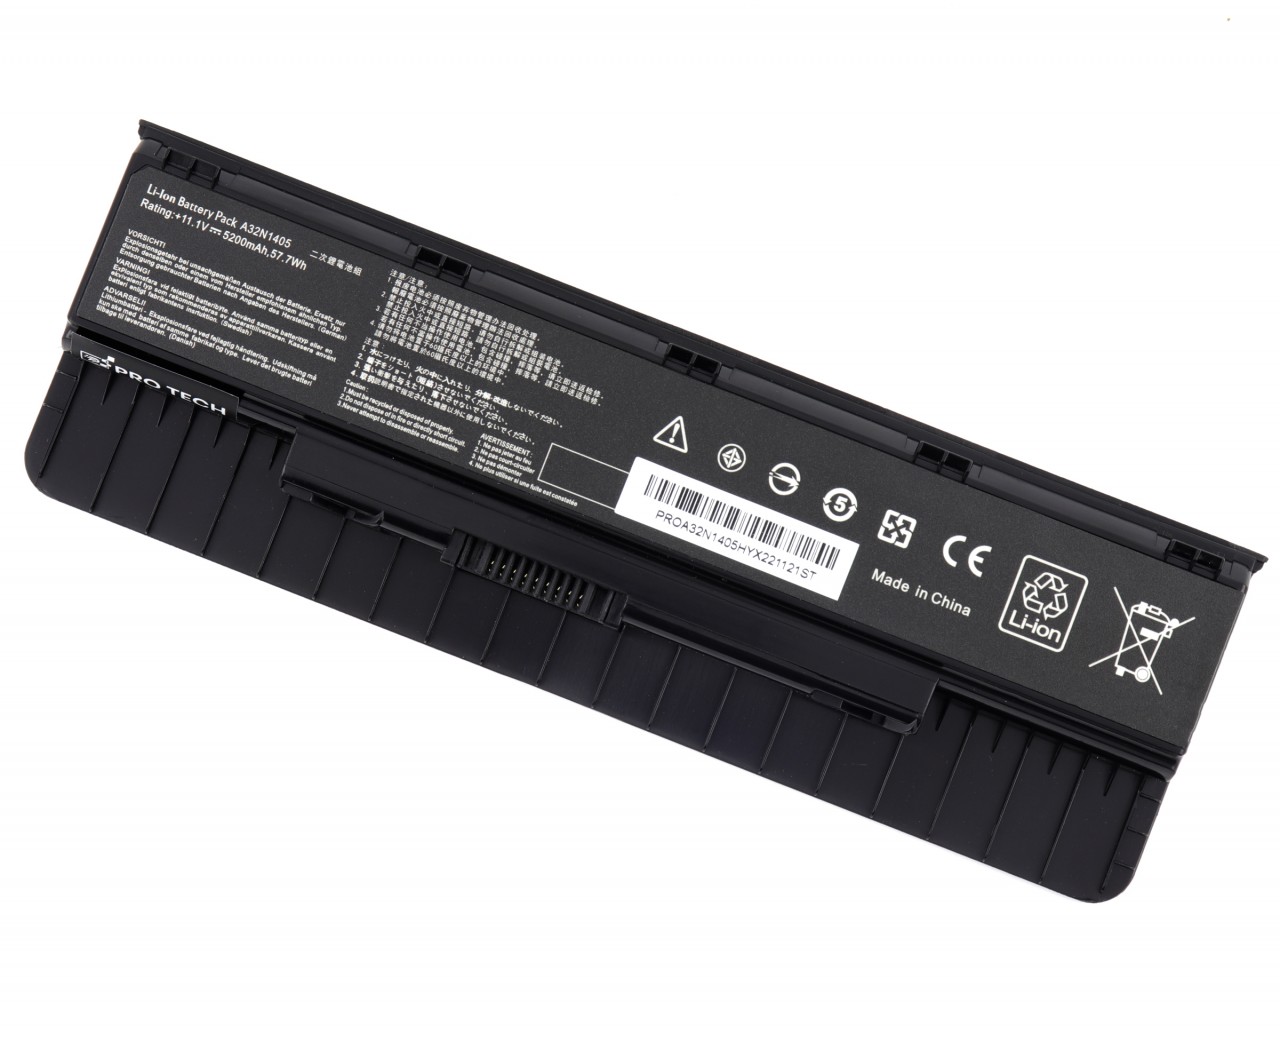 Baterie Asus N551JK 57.7Wh / 5200mAh Protech High Quality Replacement